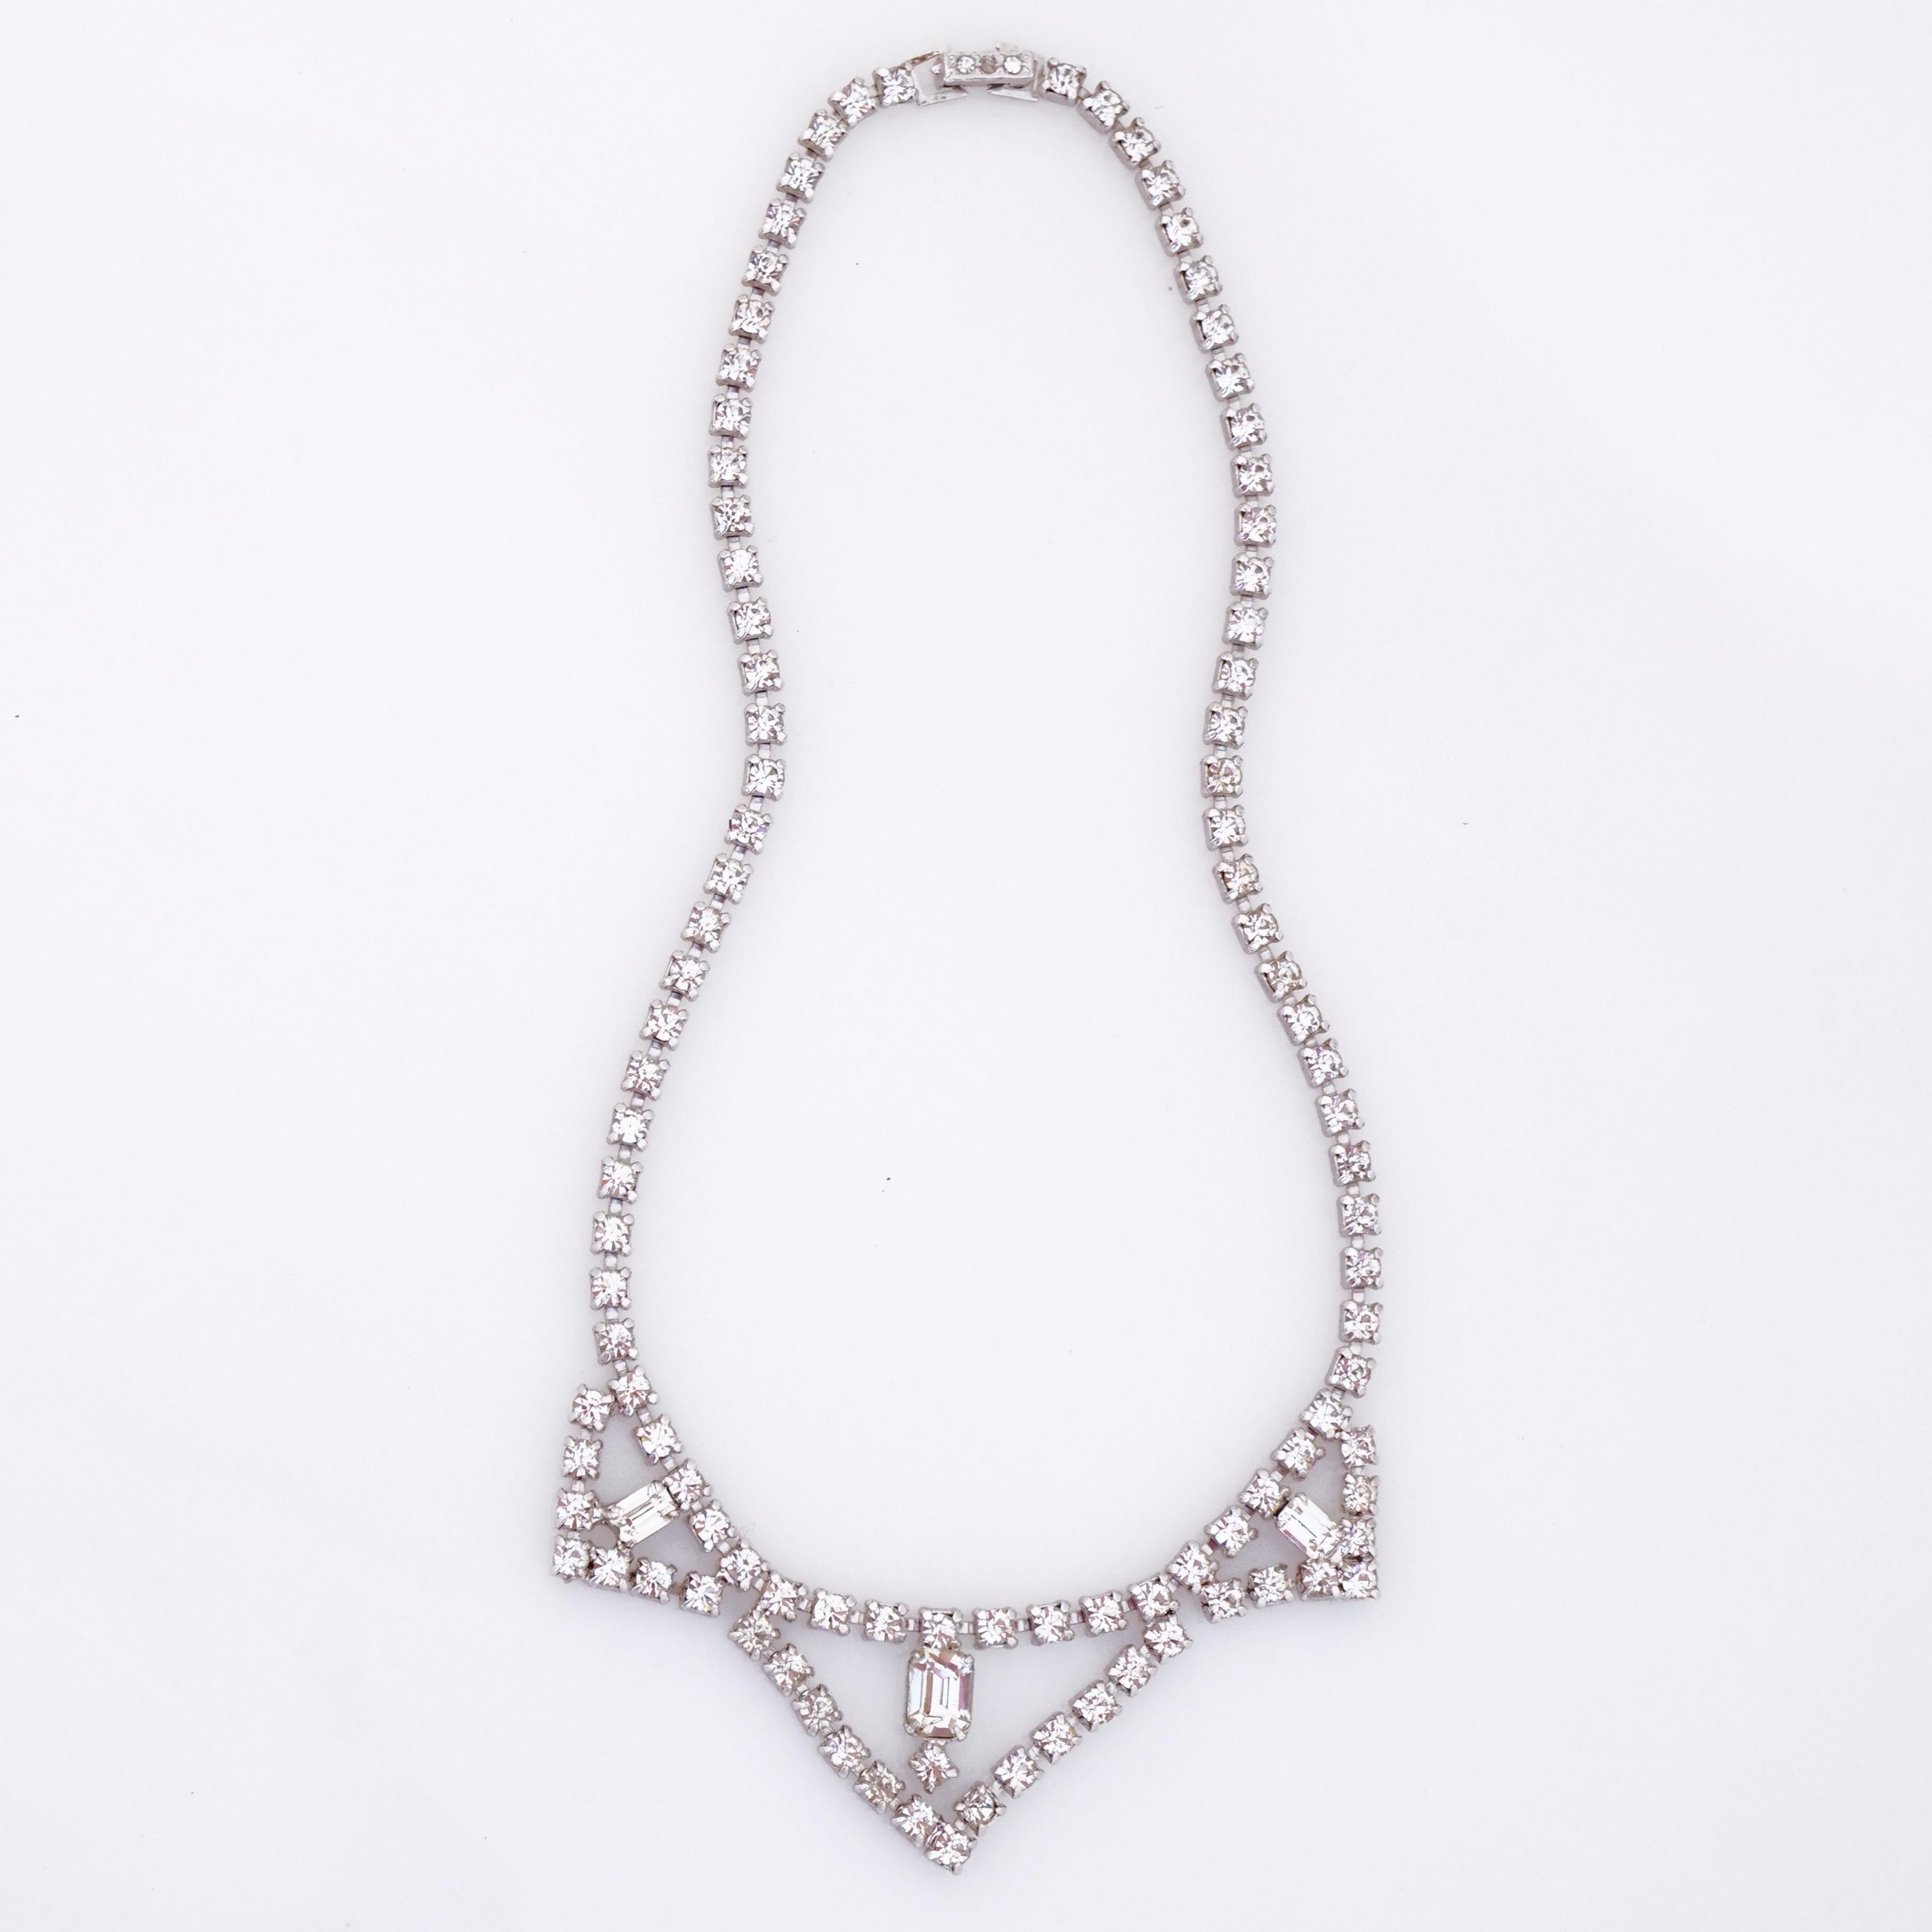 1950s crystal necklace